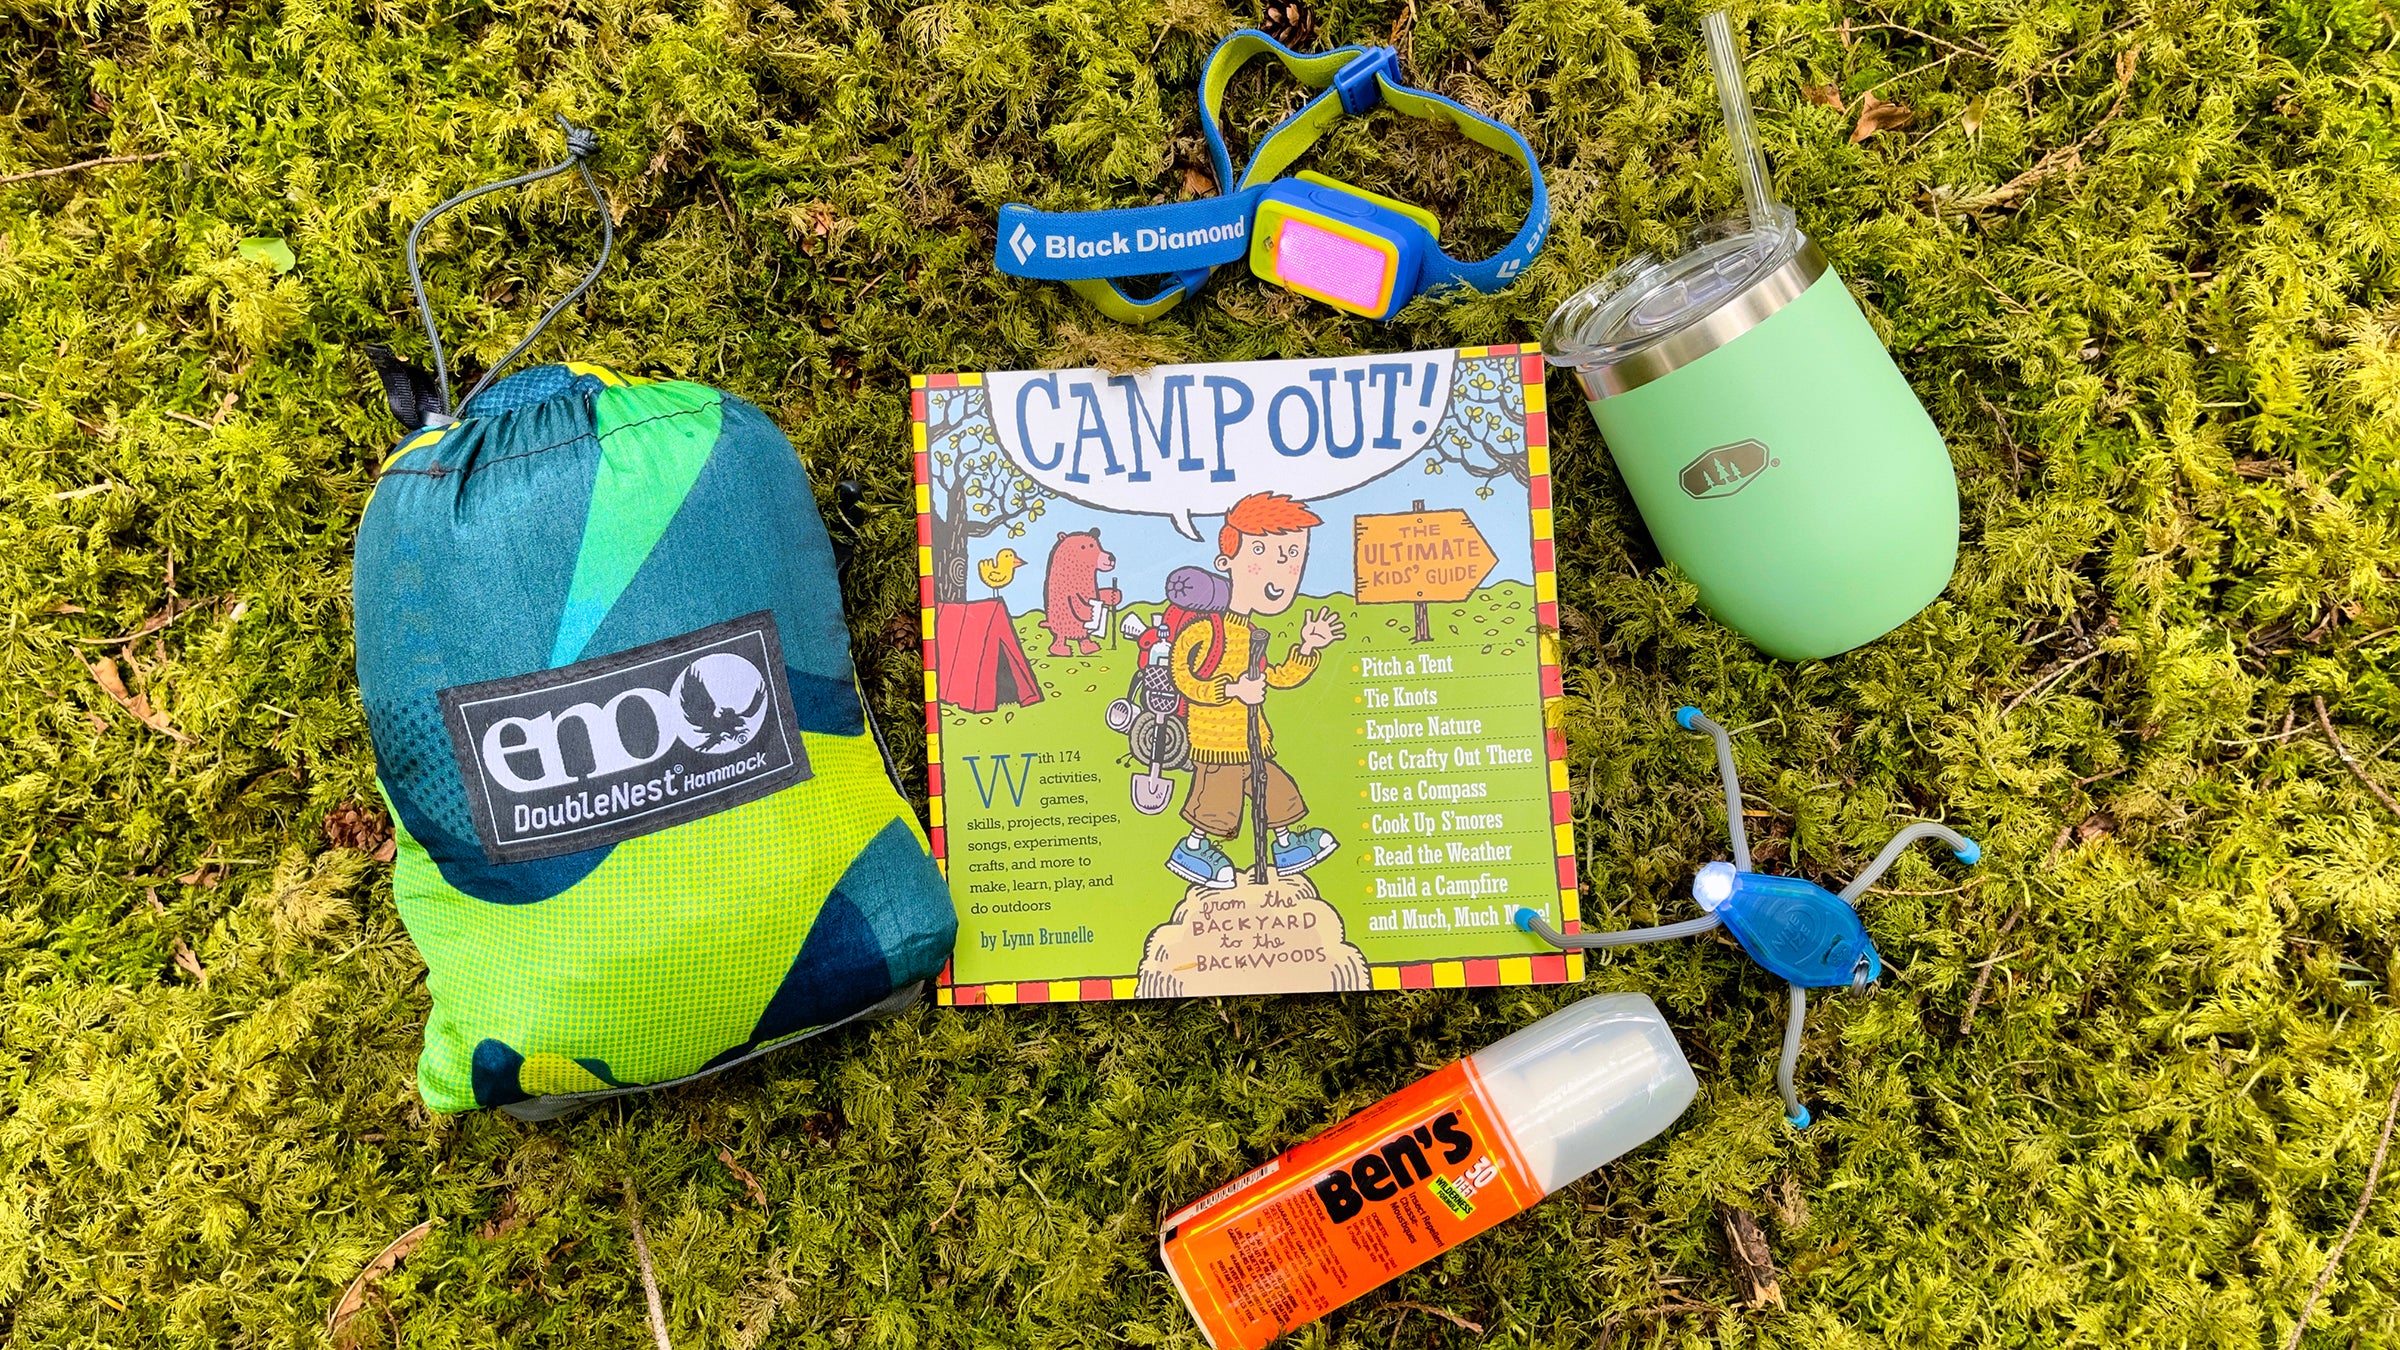 Outdoor Gear that Makes Camping with Kids More Fun